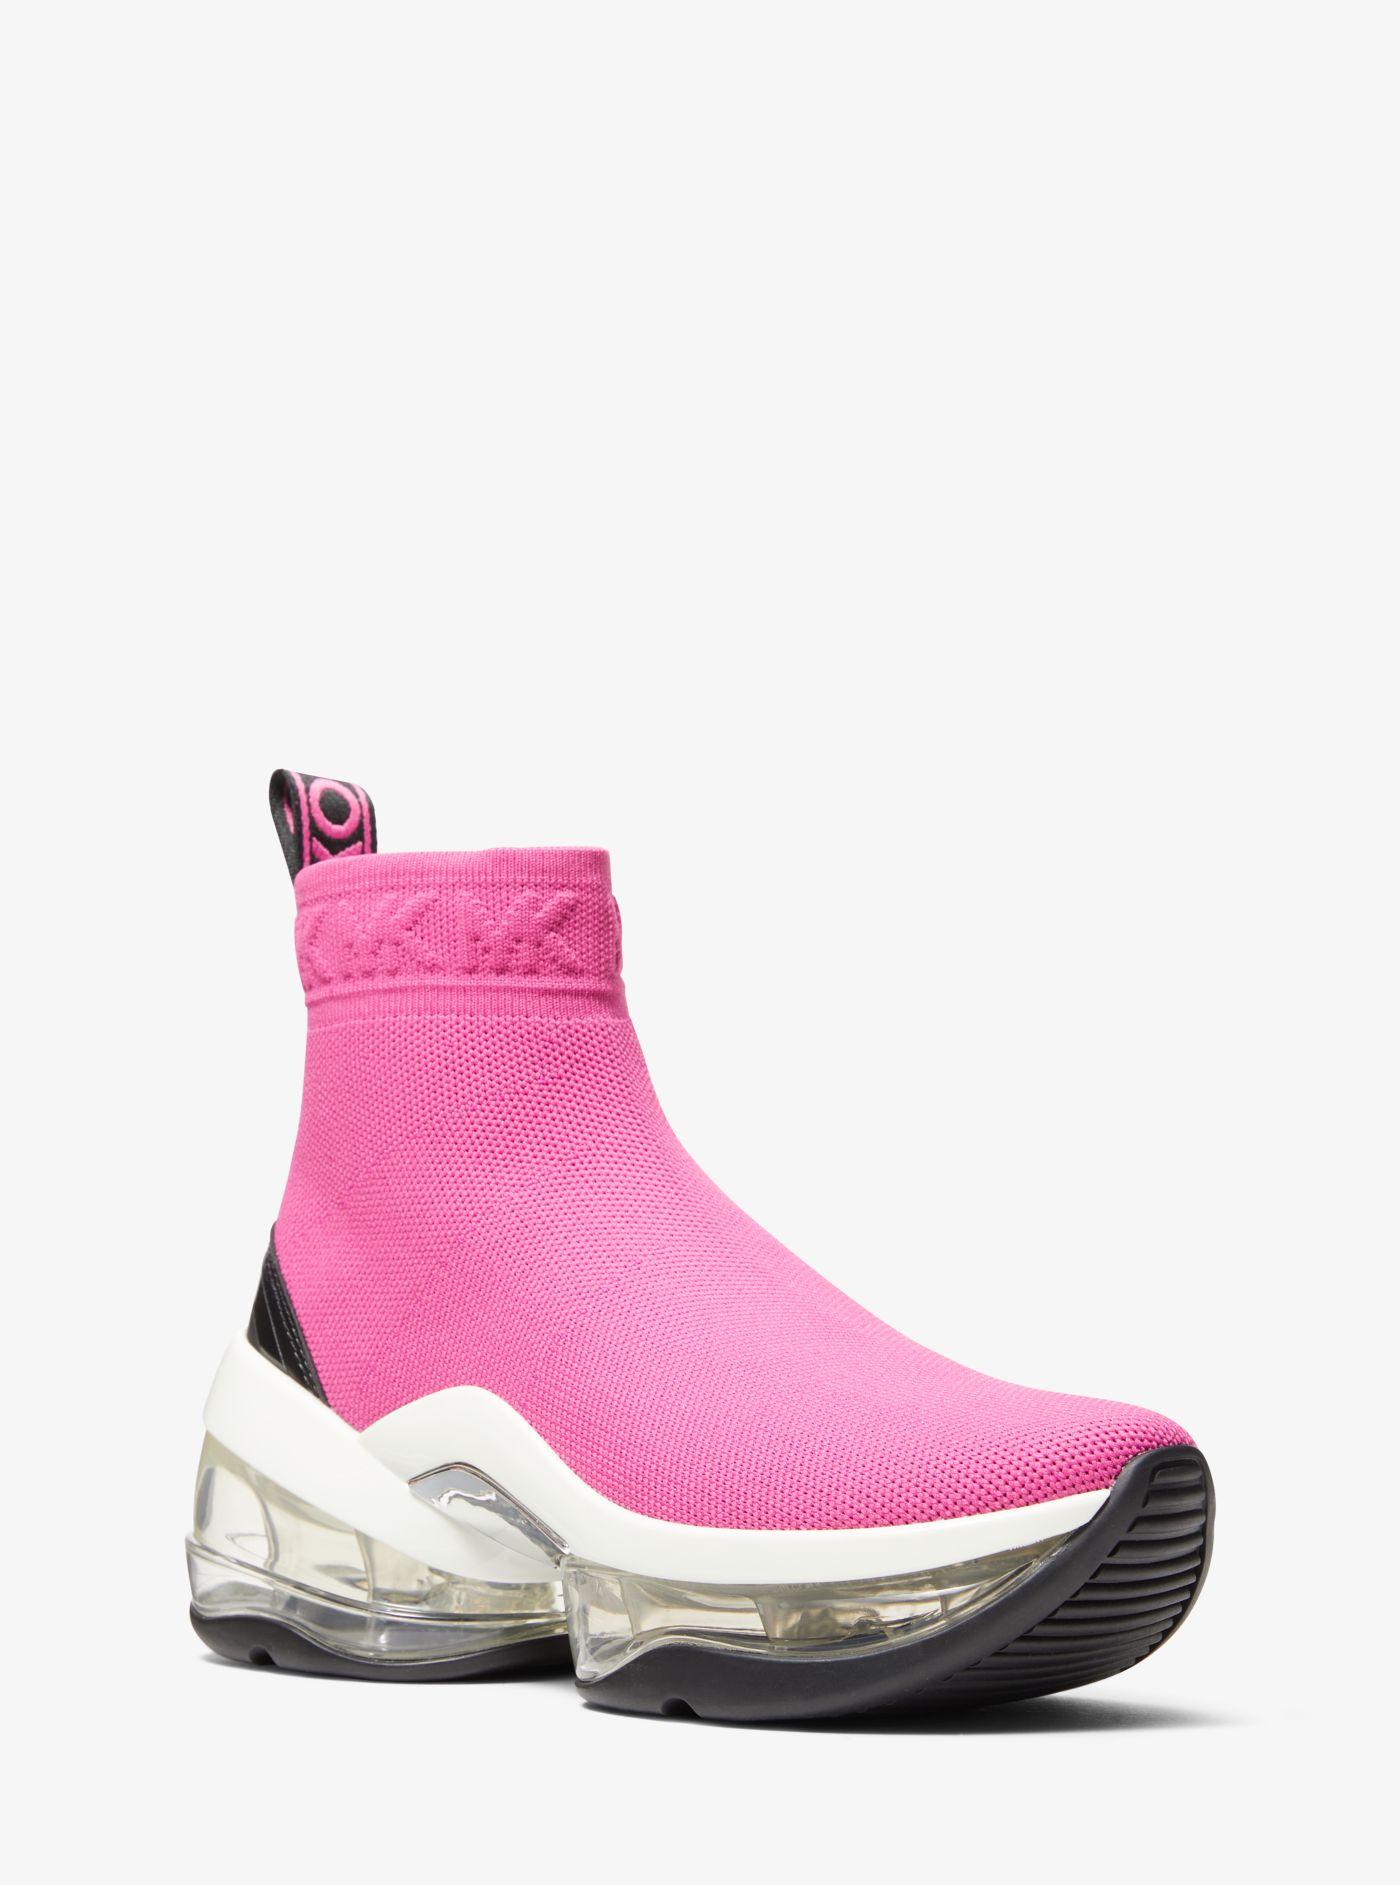 Michael Kors Olympia Extreme Stretch Knit Sock Sneaker in Pink | Lyst Canada